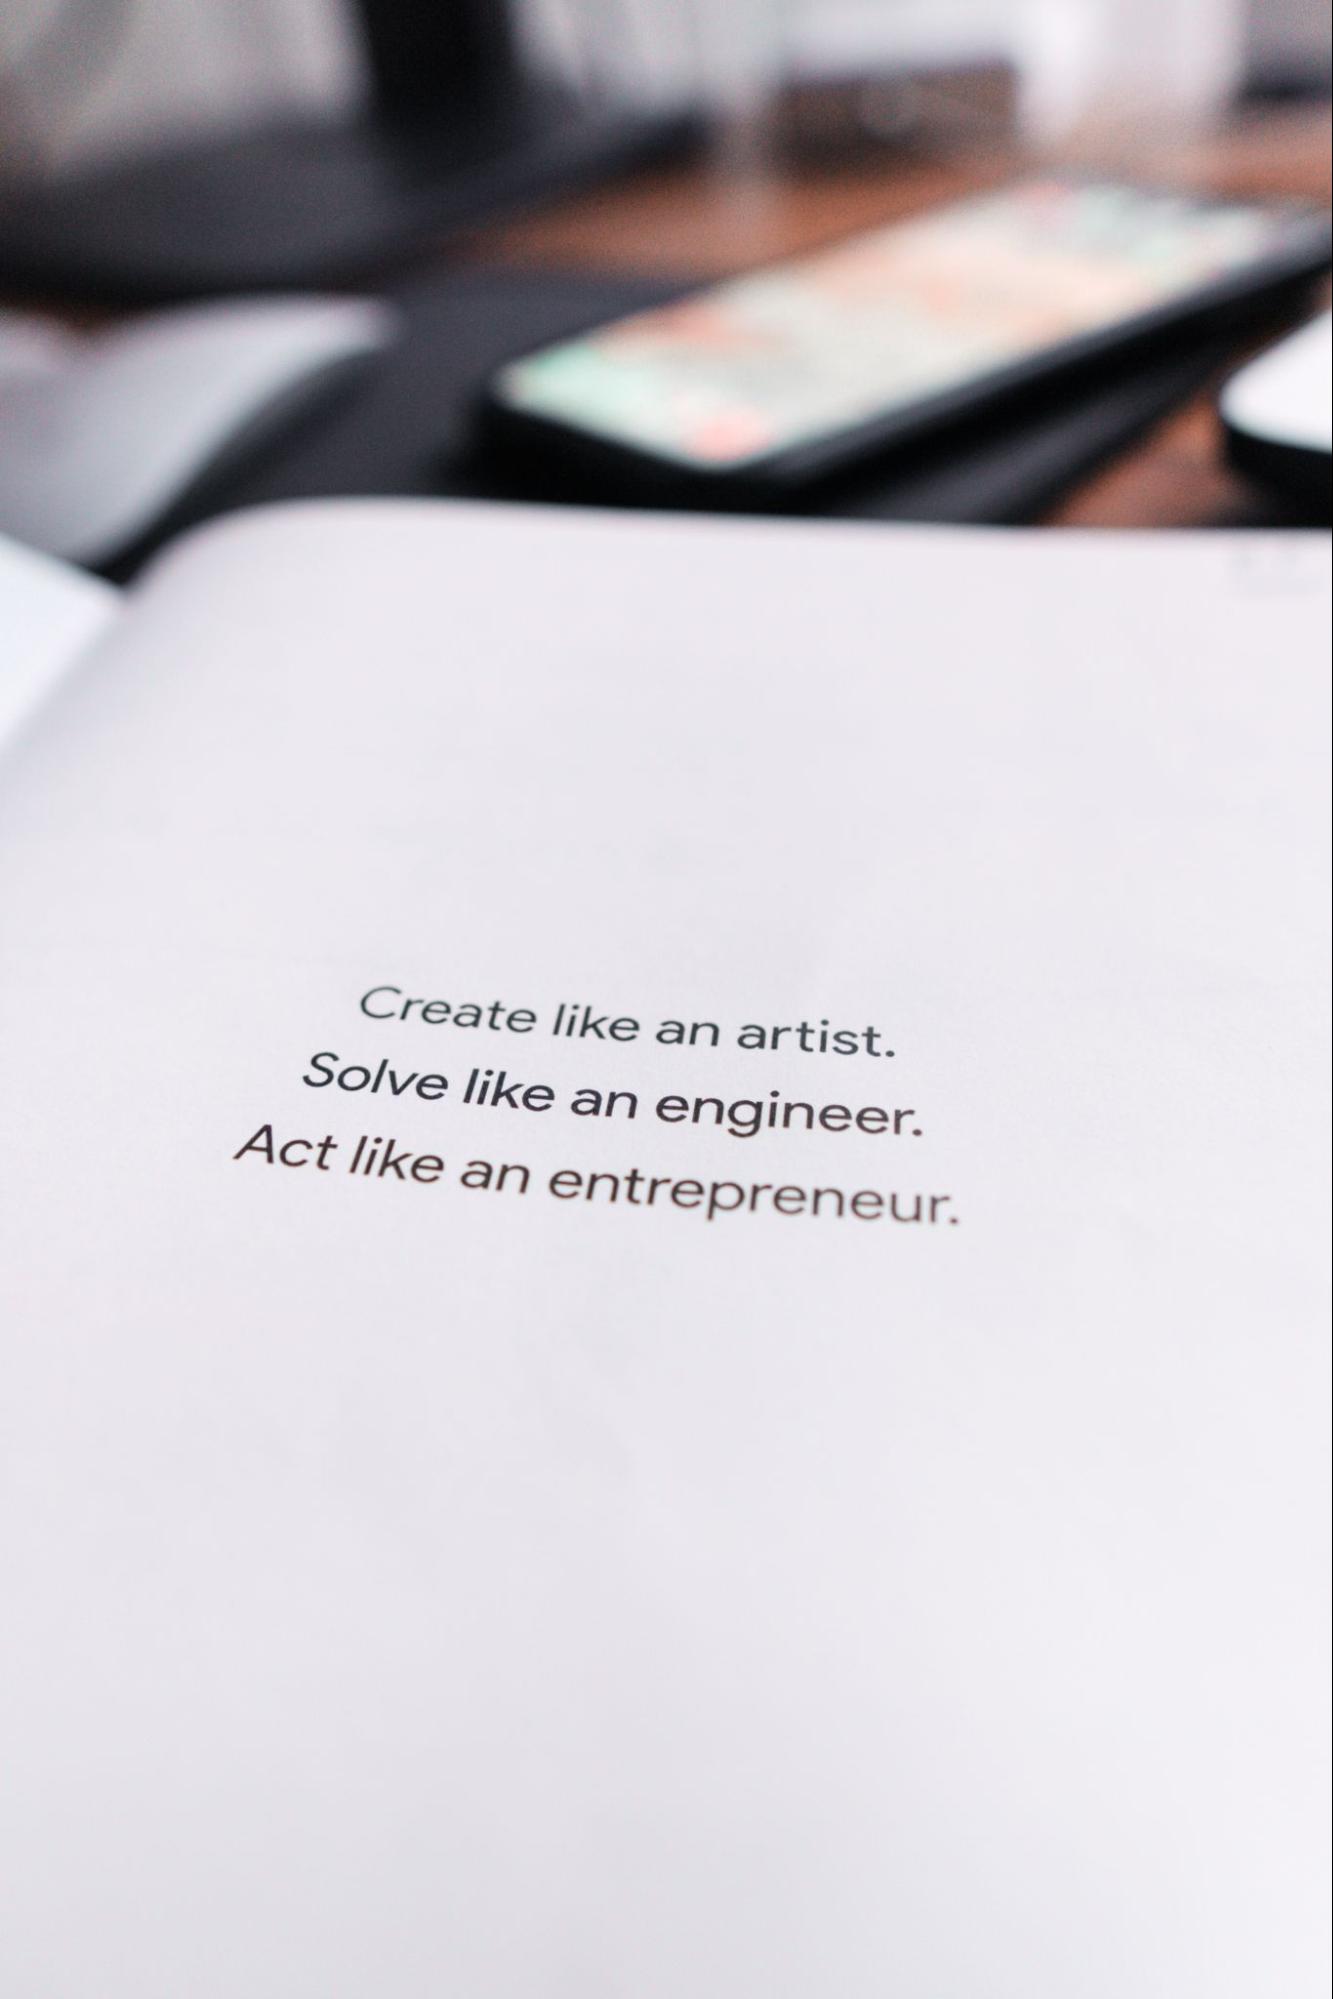 Page from book with motivational quote: “Create like an artist. Solve like an engineer. Act like an entrepreneur.